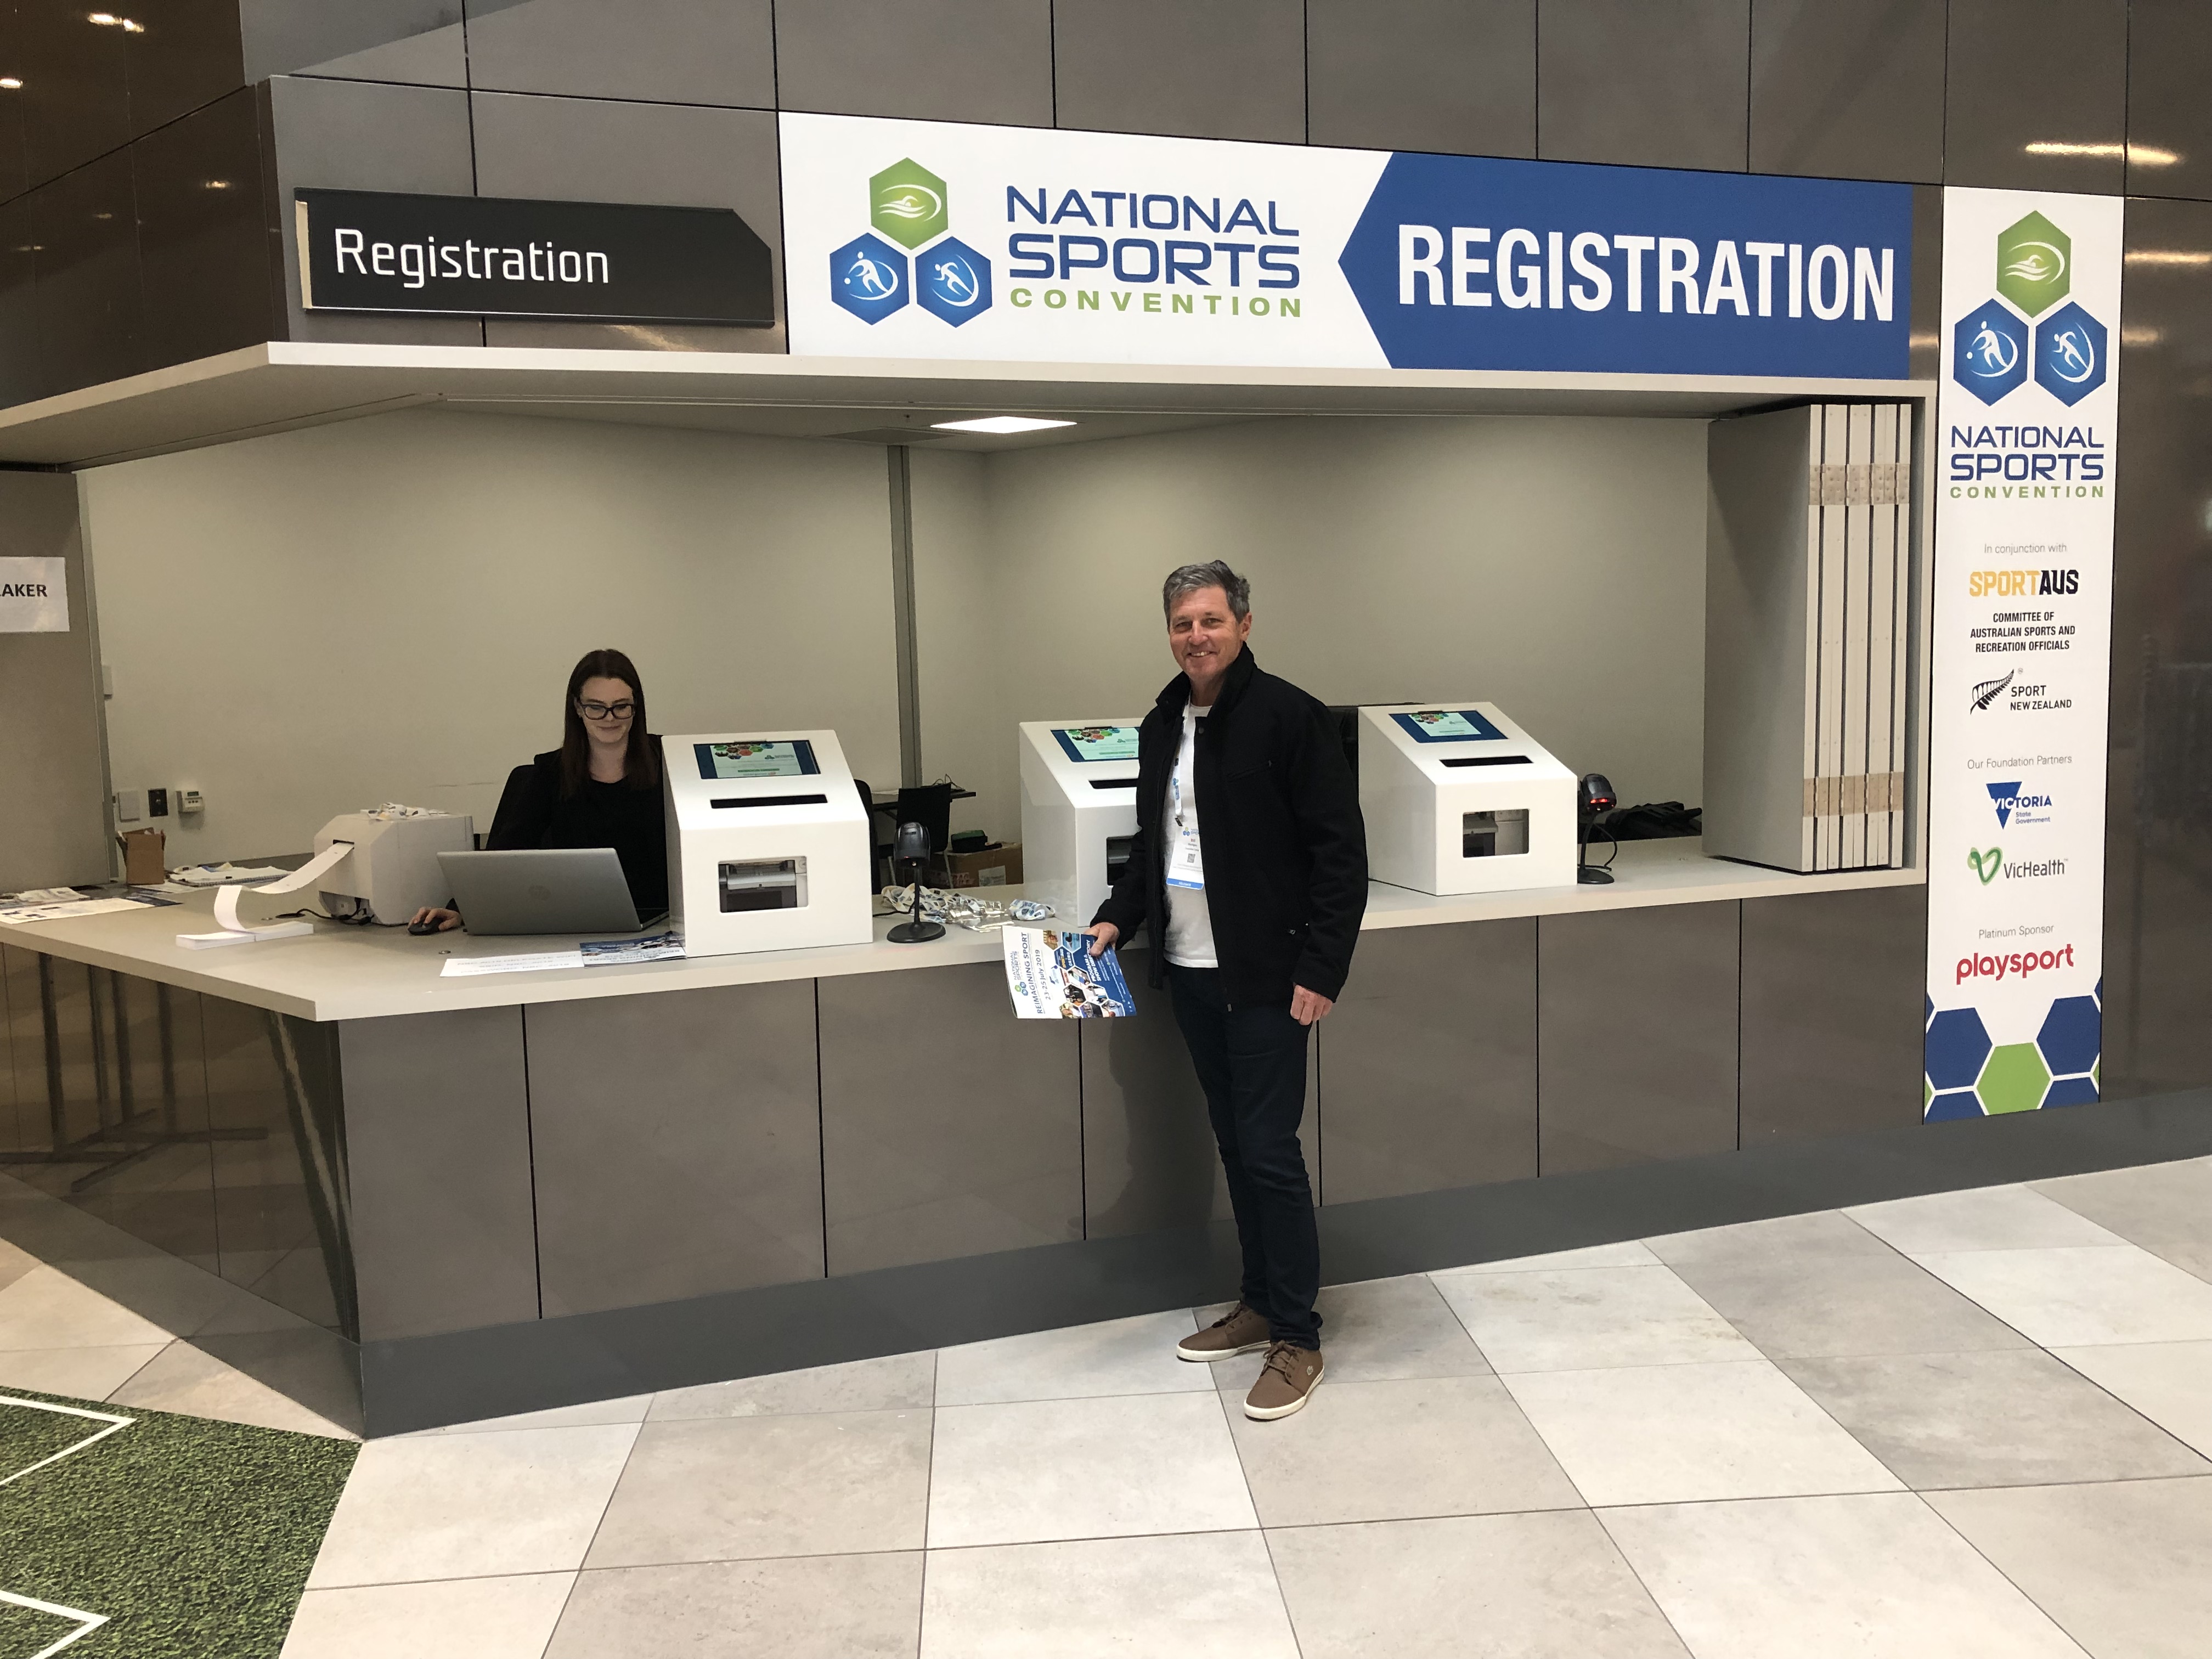 Oztag Represented at the 2019 National Sports Convention